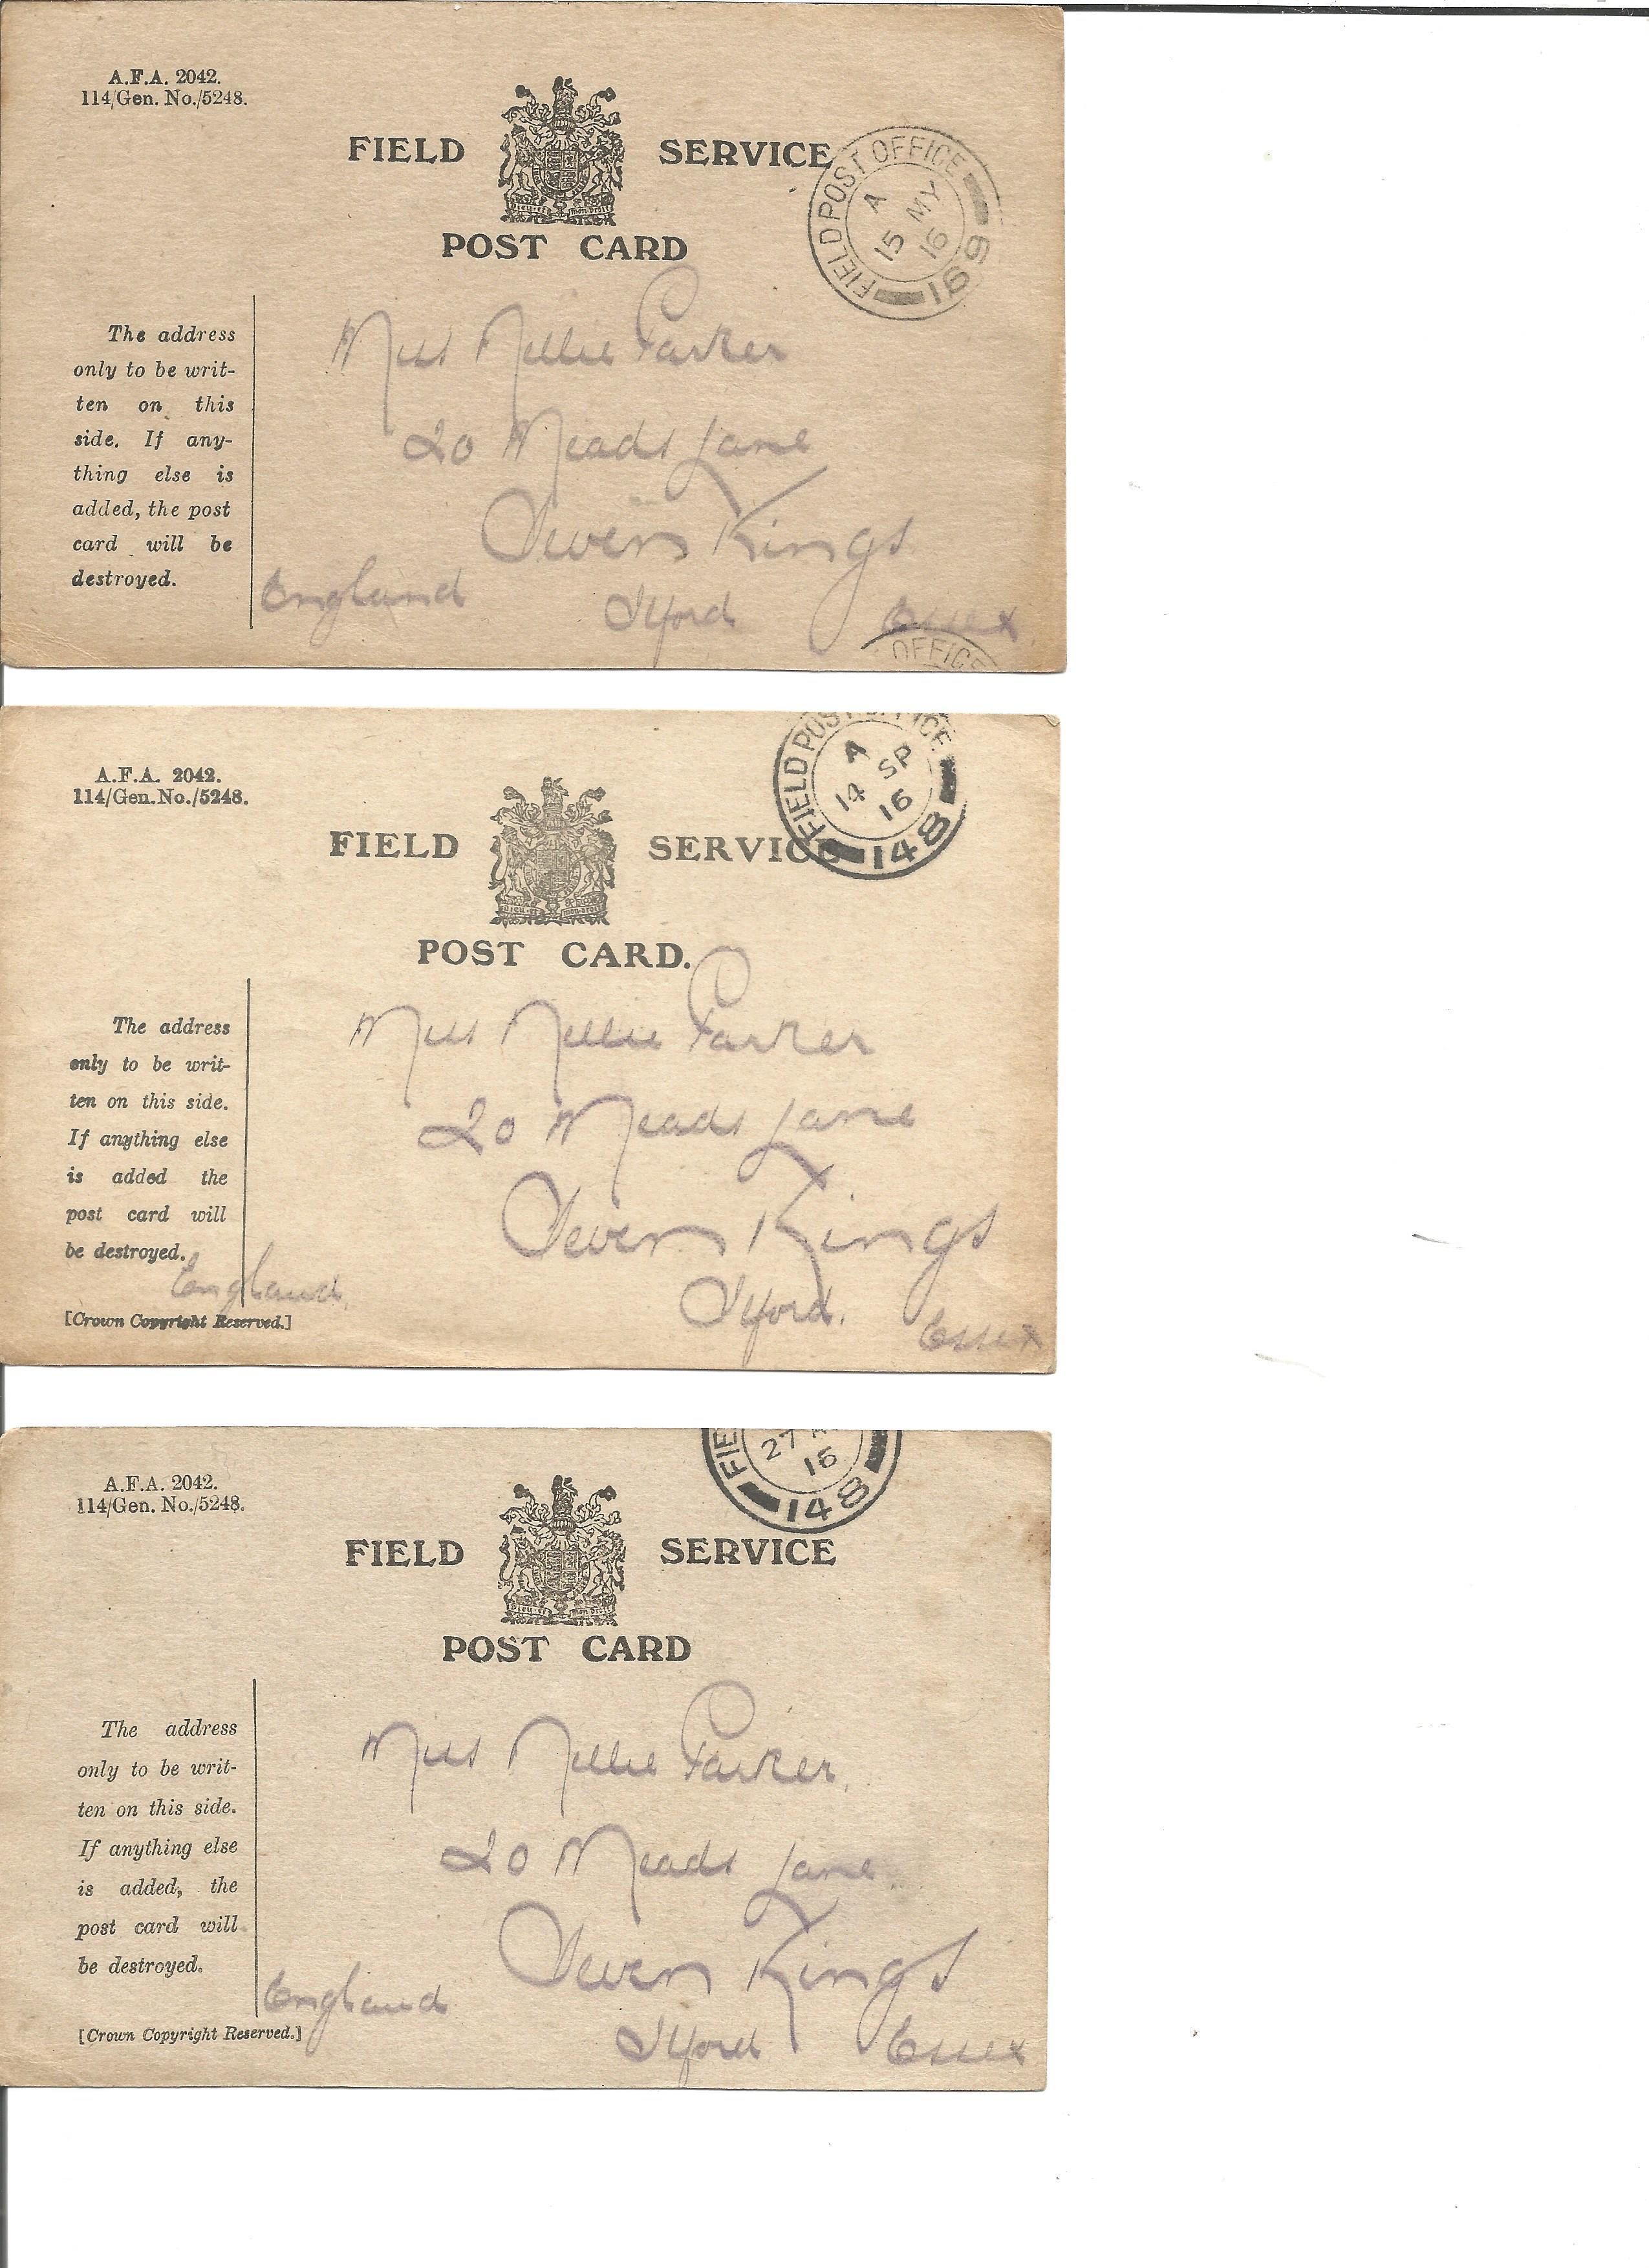 1915 Great War Field Service Postcards. Two cards with Army Post Office CDS postmarks. Both are